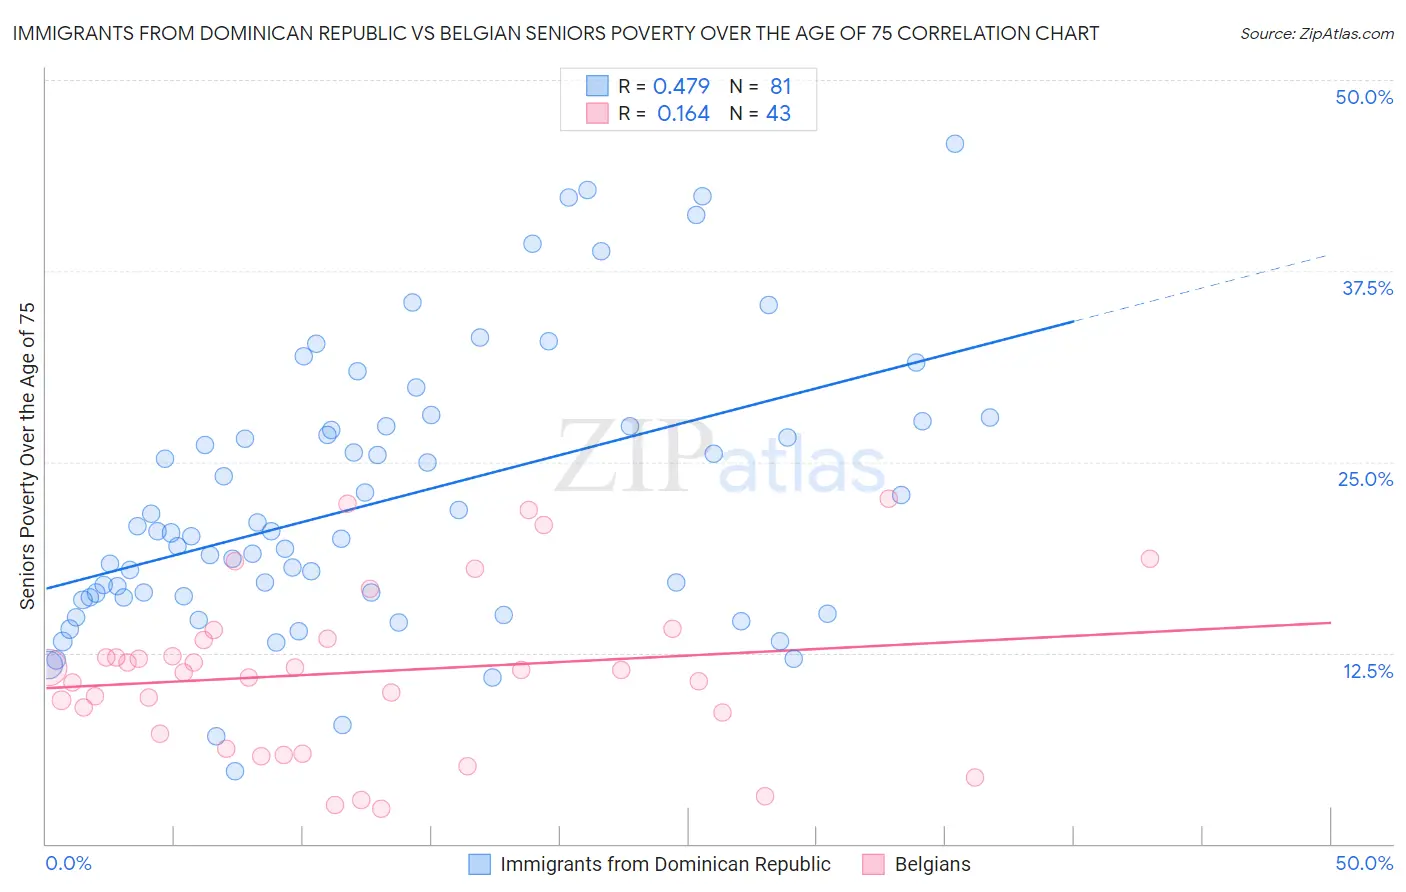 Immigrants from Dominican Republic vs Belgian Seniors Poverty Over the Age of 75